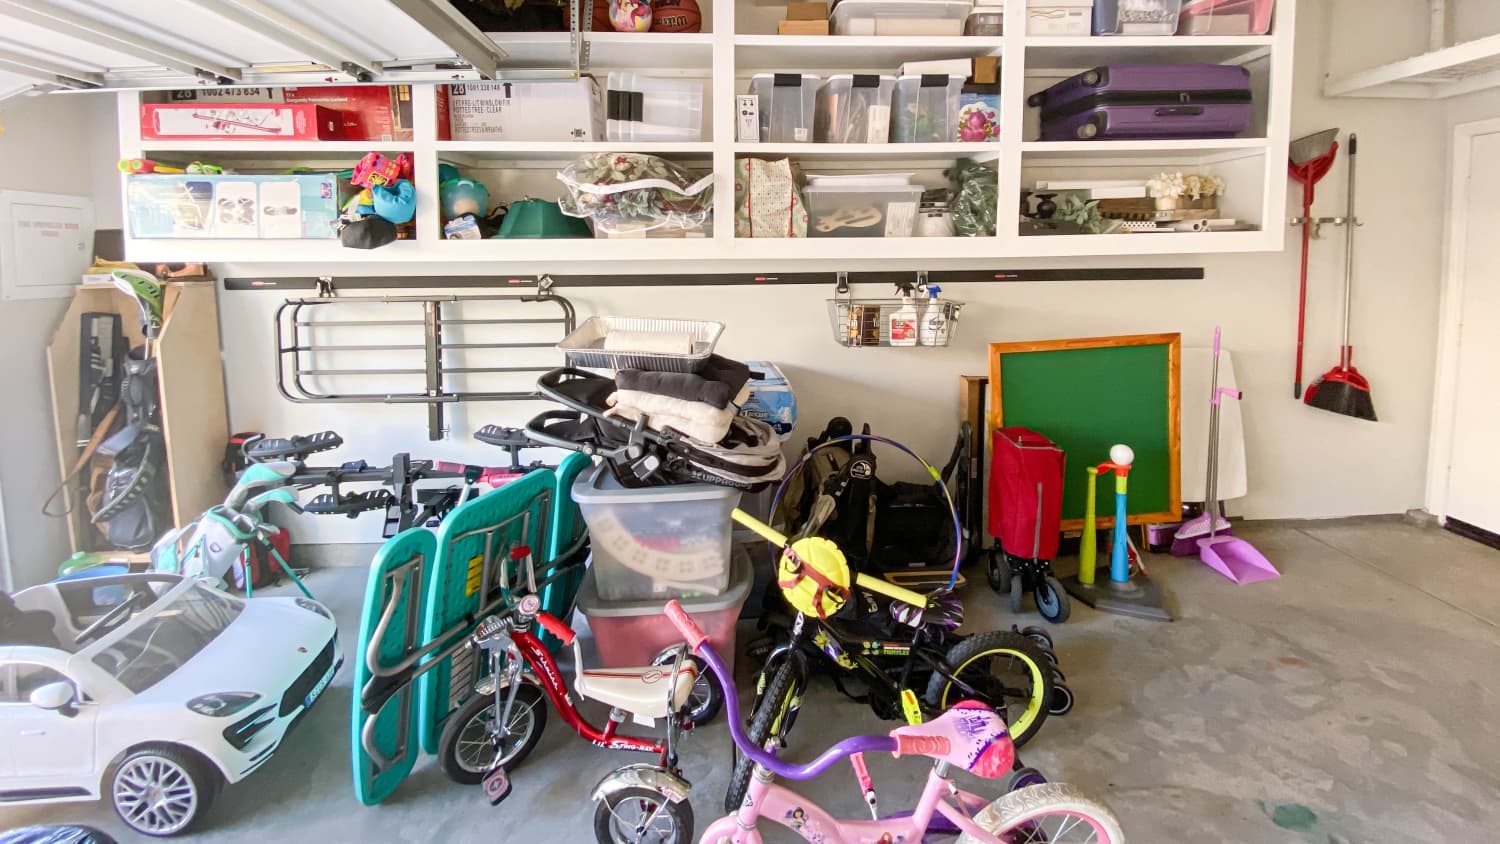 B&A: A Pro Organizer Refreshes This Cluttered Garage